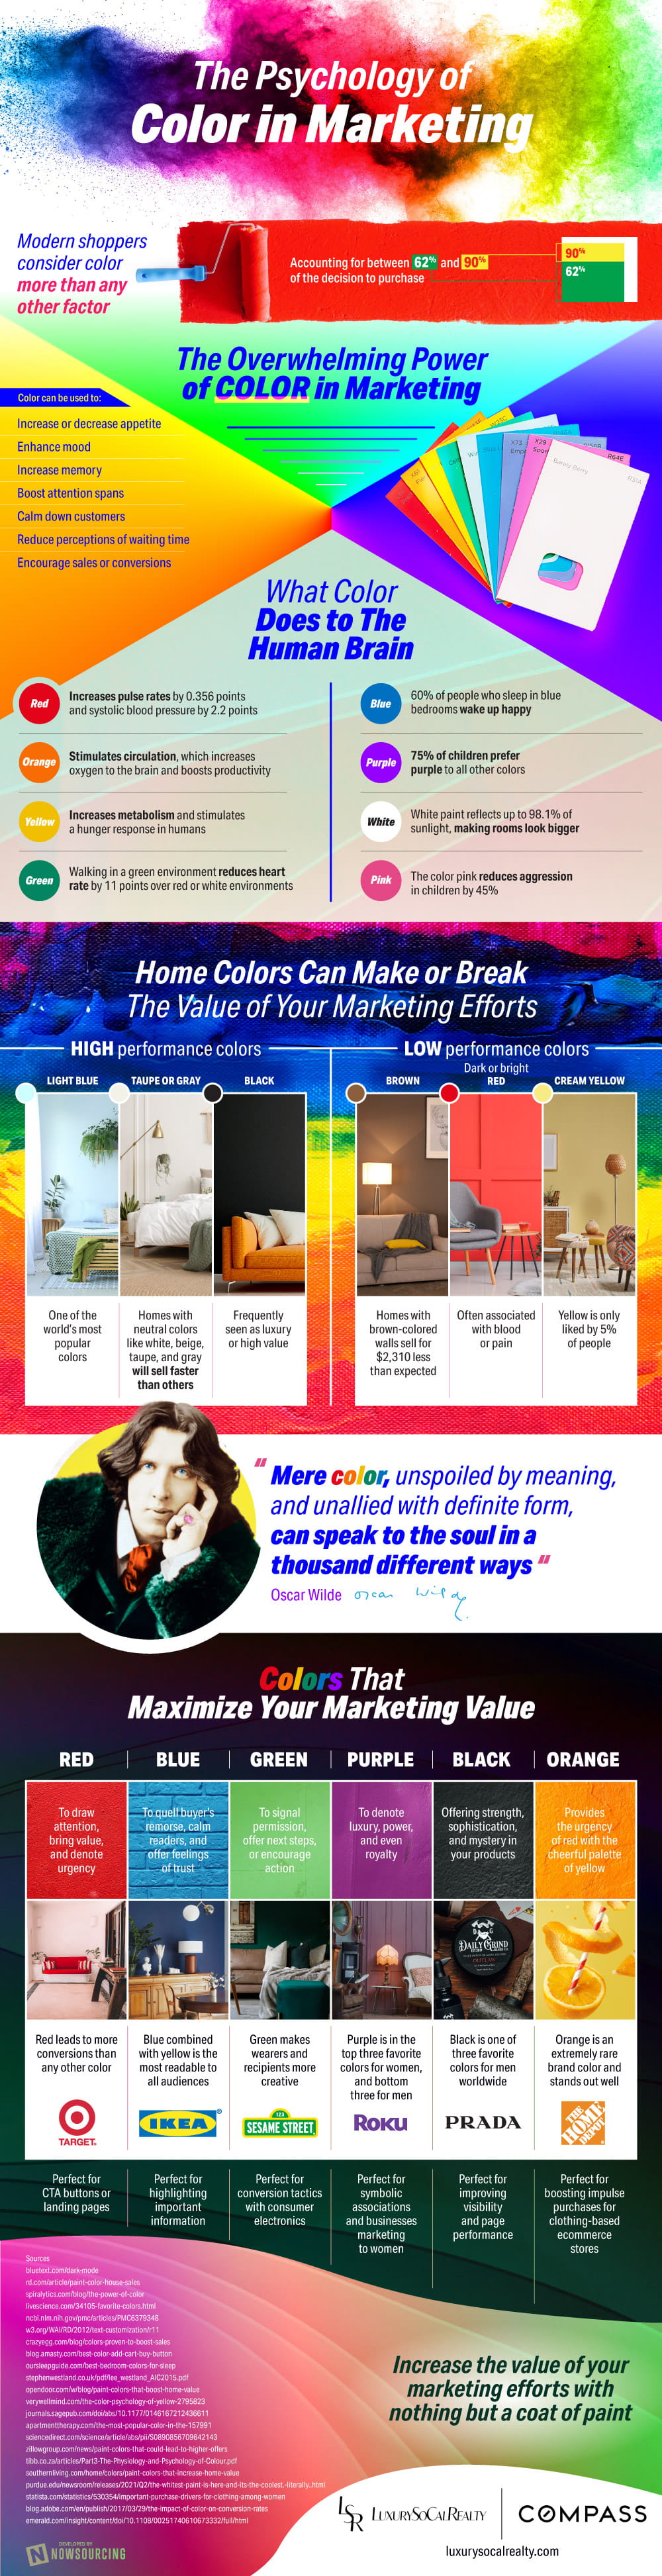 The Surprising Power of Color